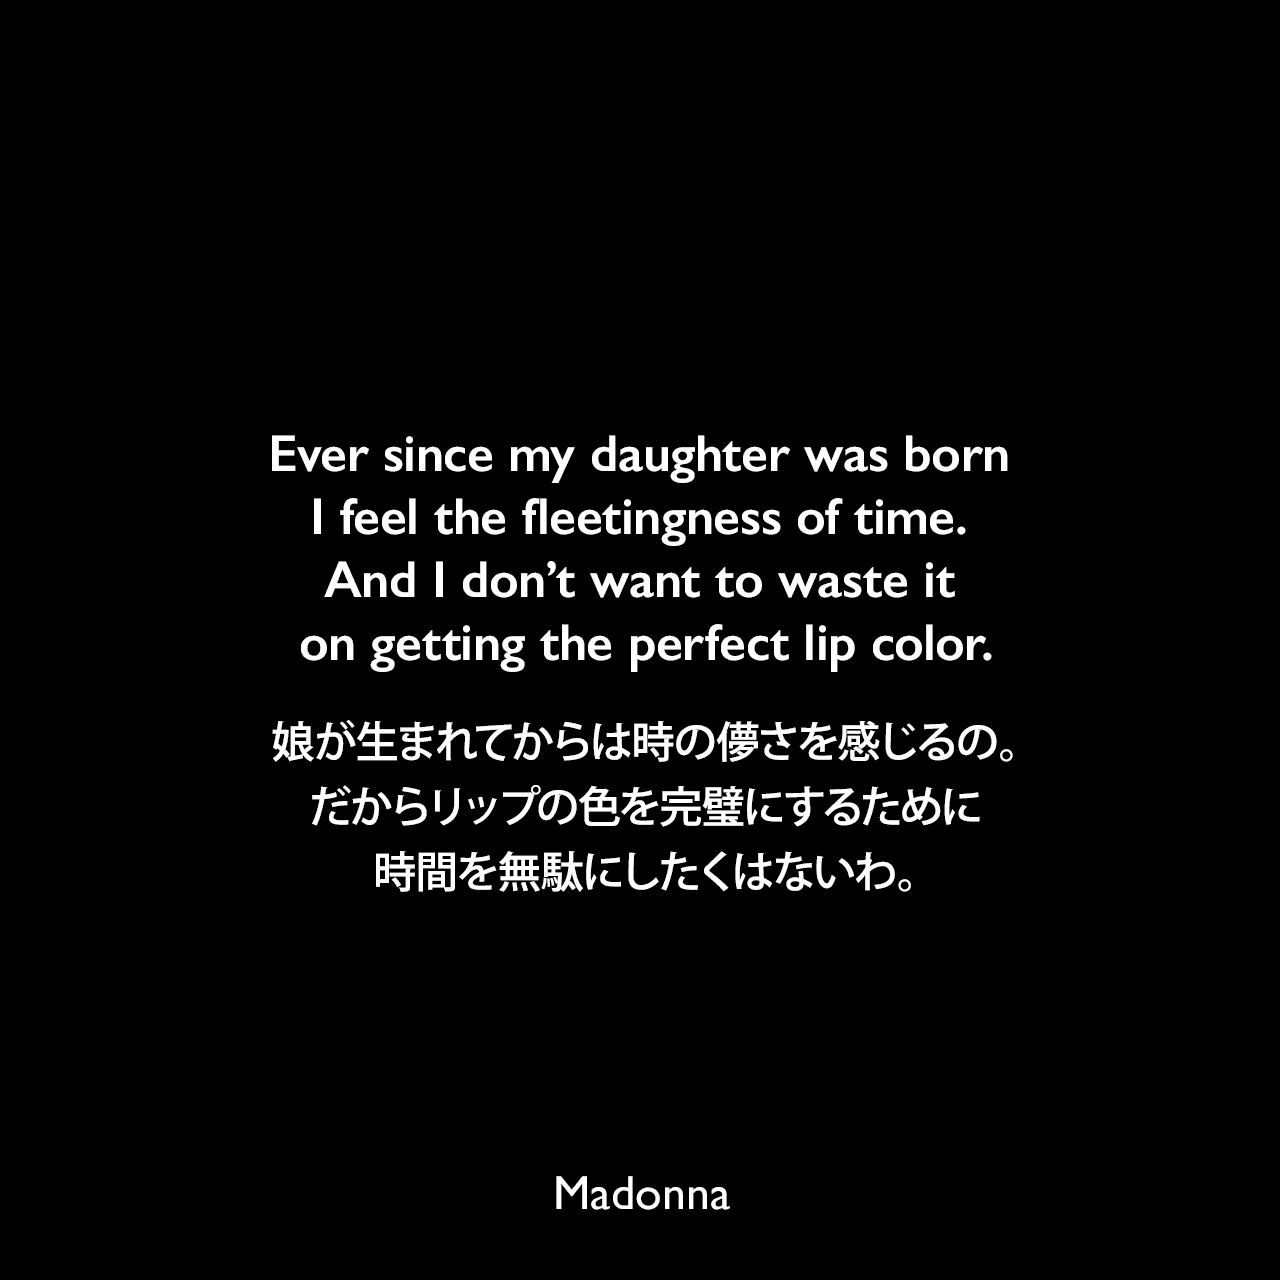 Ever since my daughter was born I feel the fleetingness of time. And I don’t want to waste it on getting the perfect lip color.娘が生まれてからは時の儚さを感じるの。だからリップの色を完璧にするために時間を無駄にしたくはないわ。Madonna